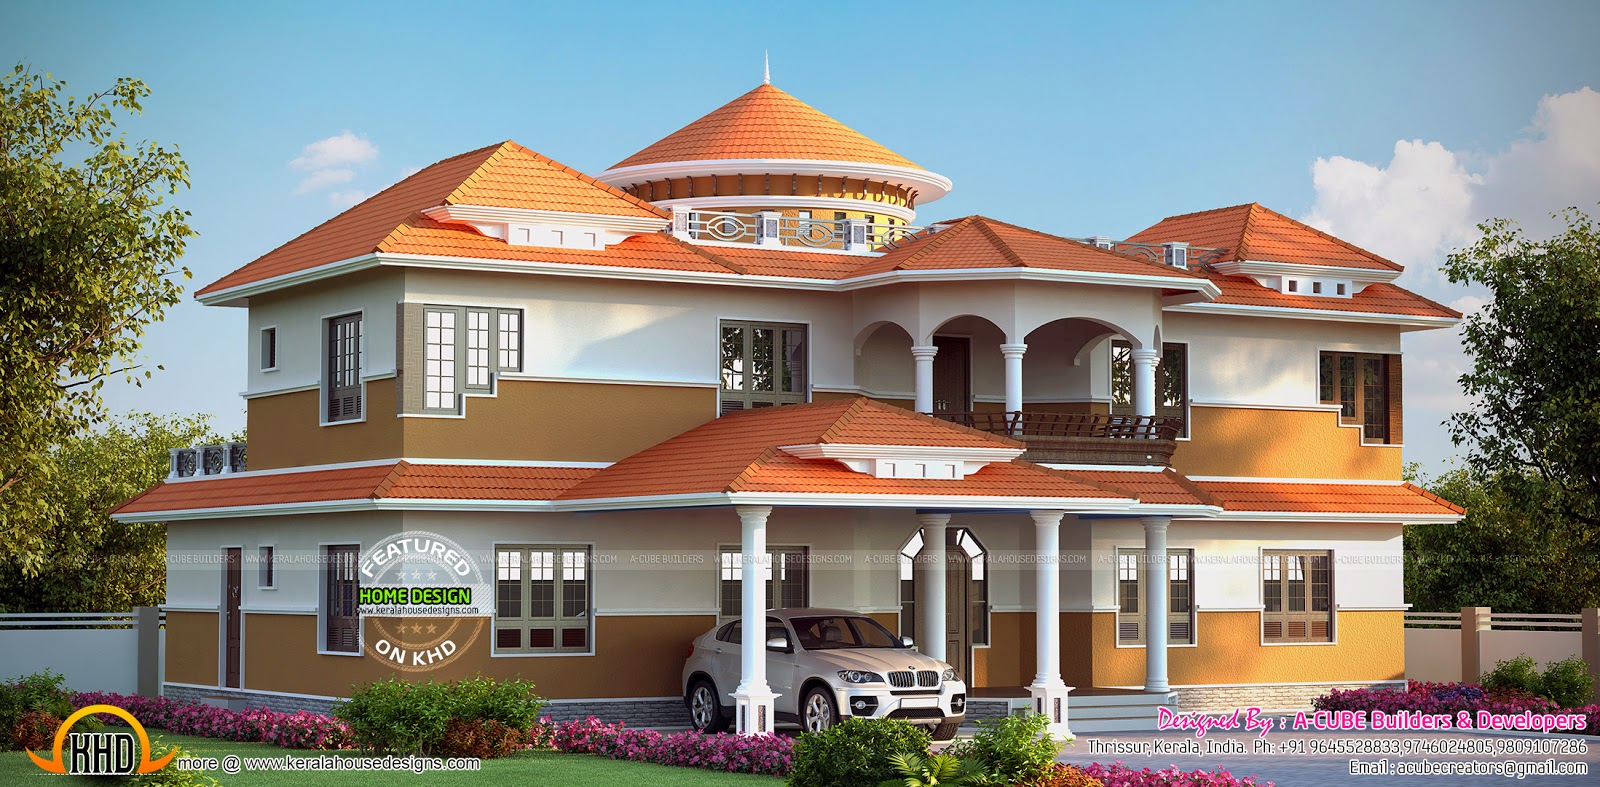 Luxury 5 bedroom house exterior - Kerala home design and ...